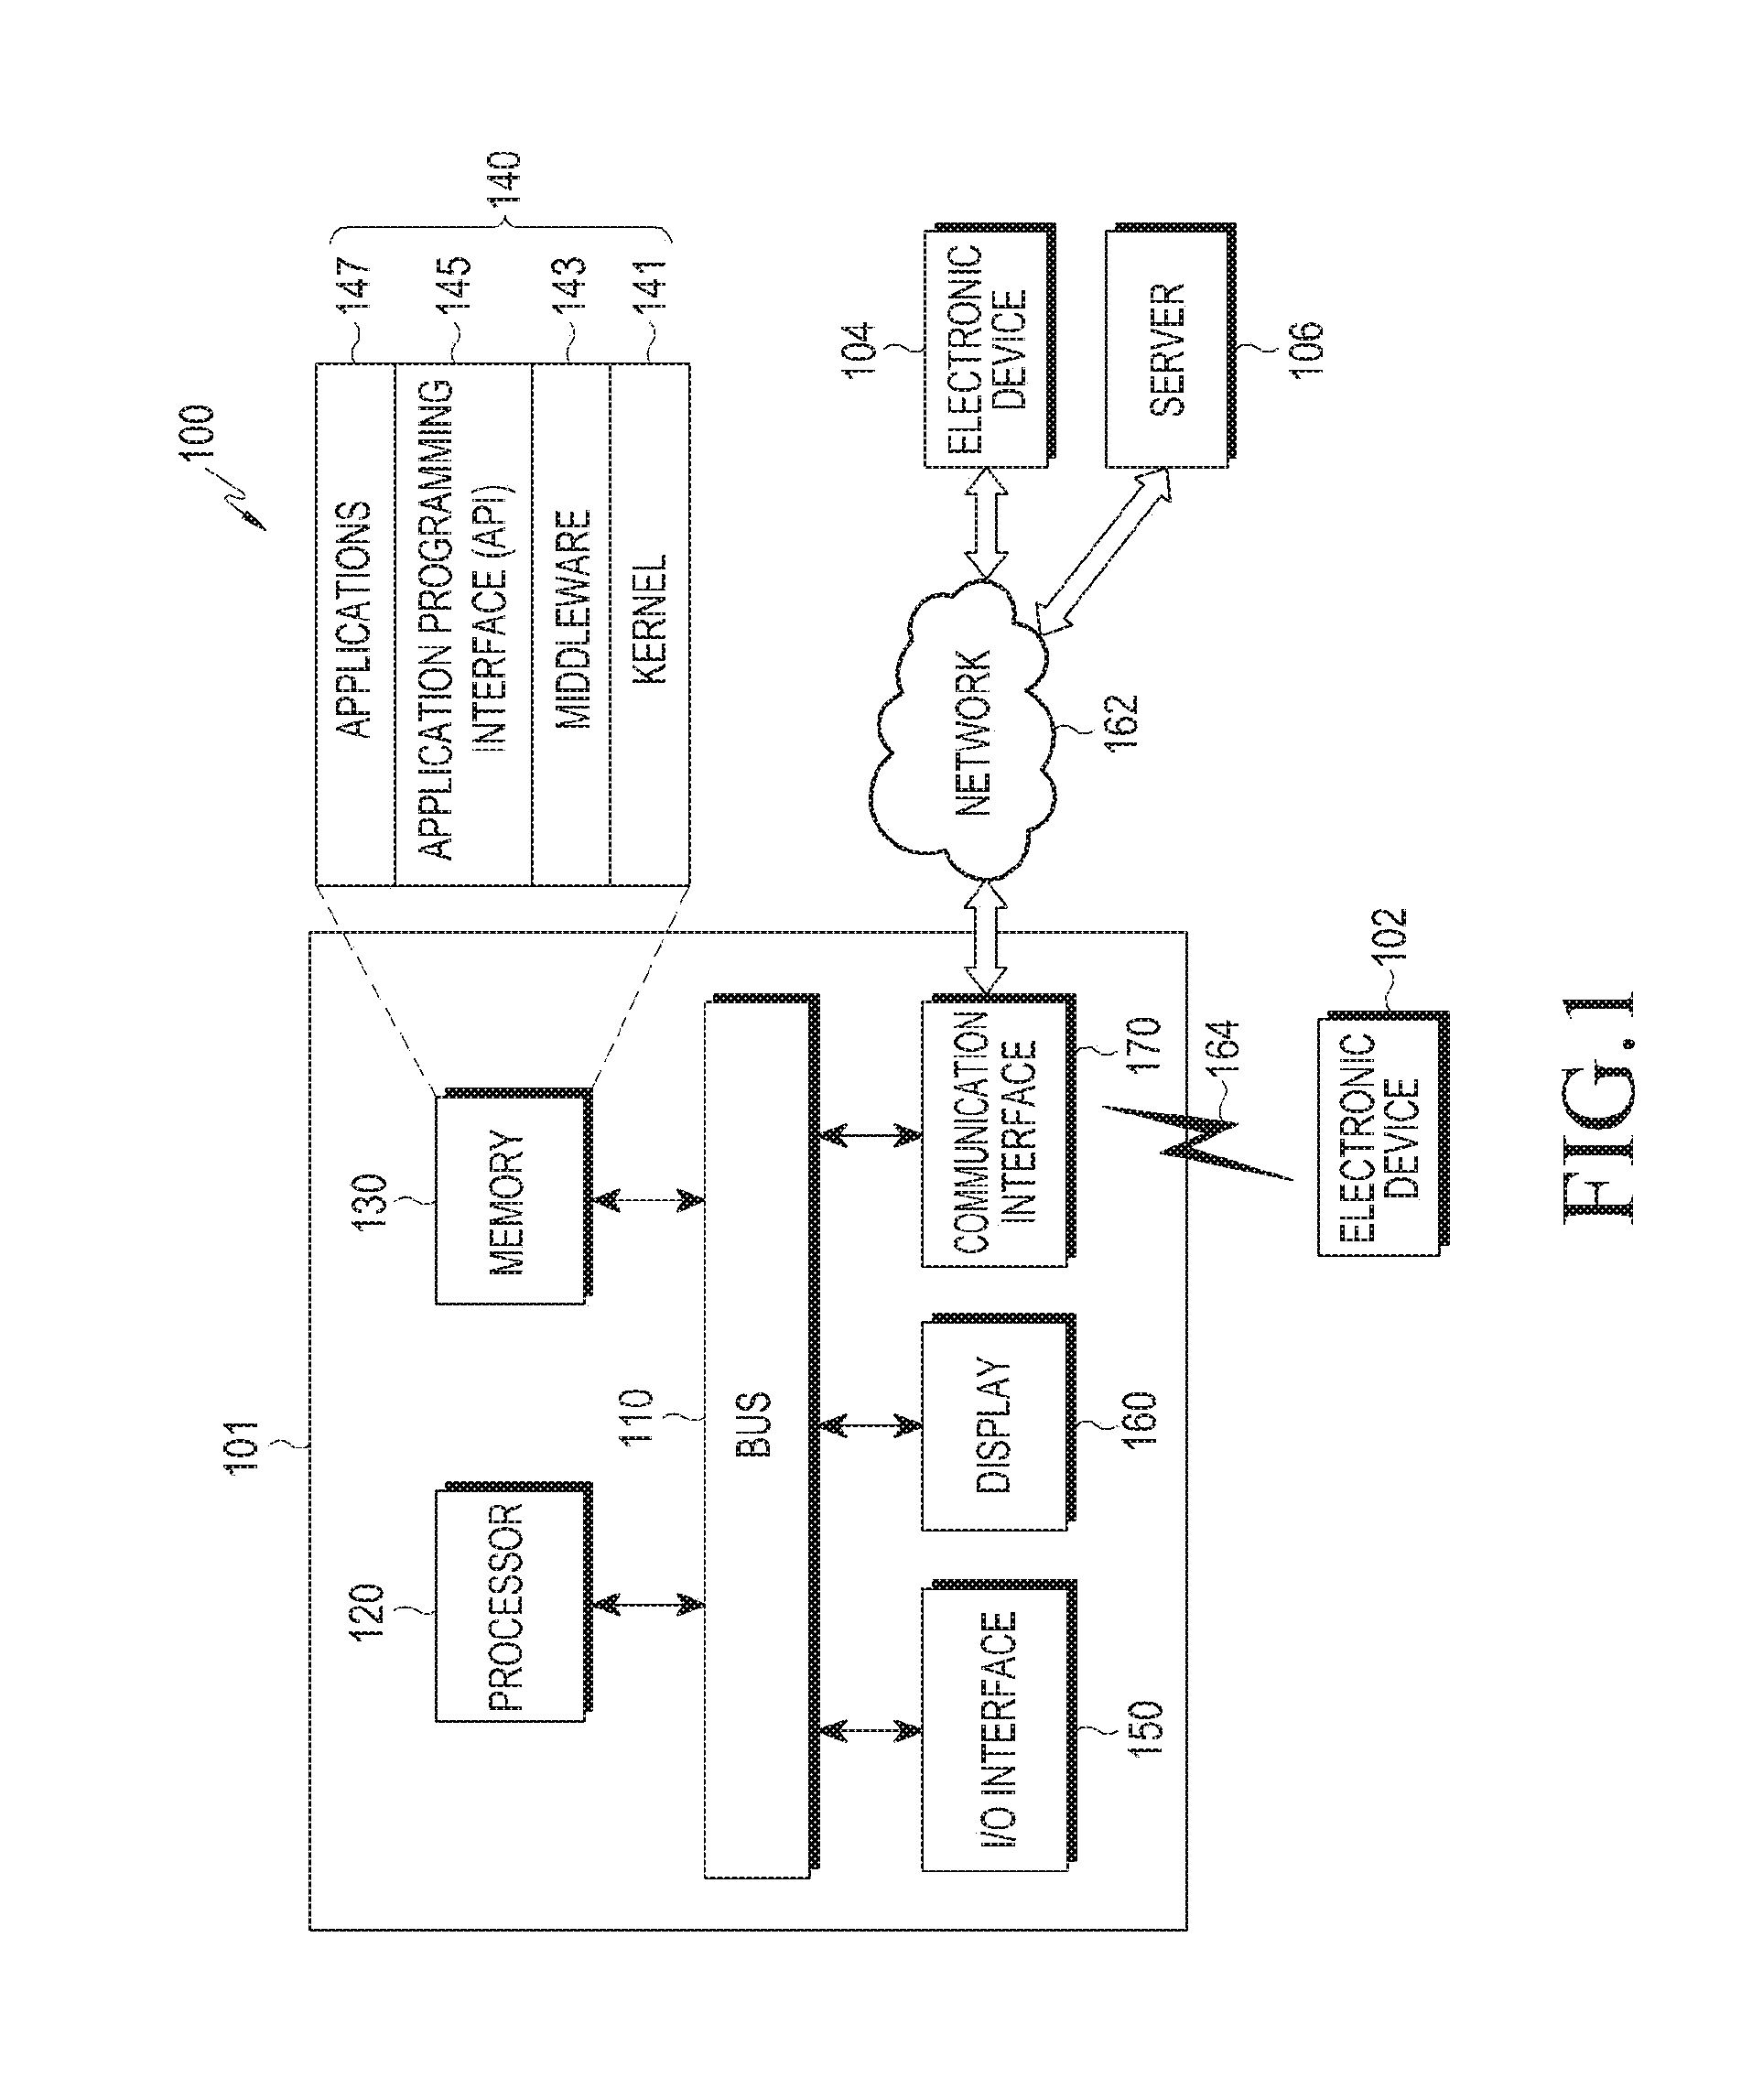 Method and apparatus for batch-processing multiple data